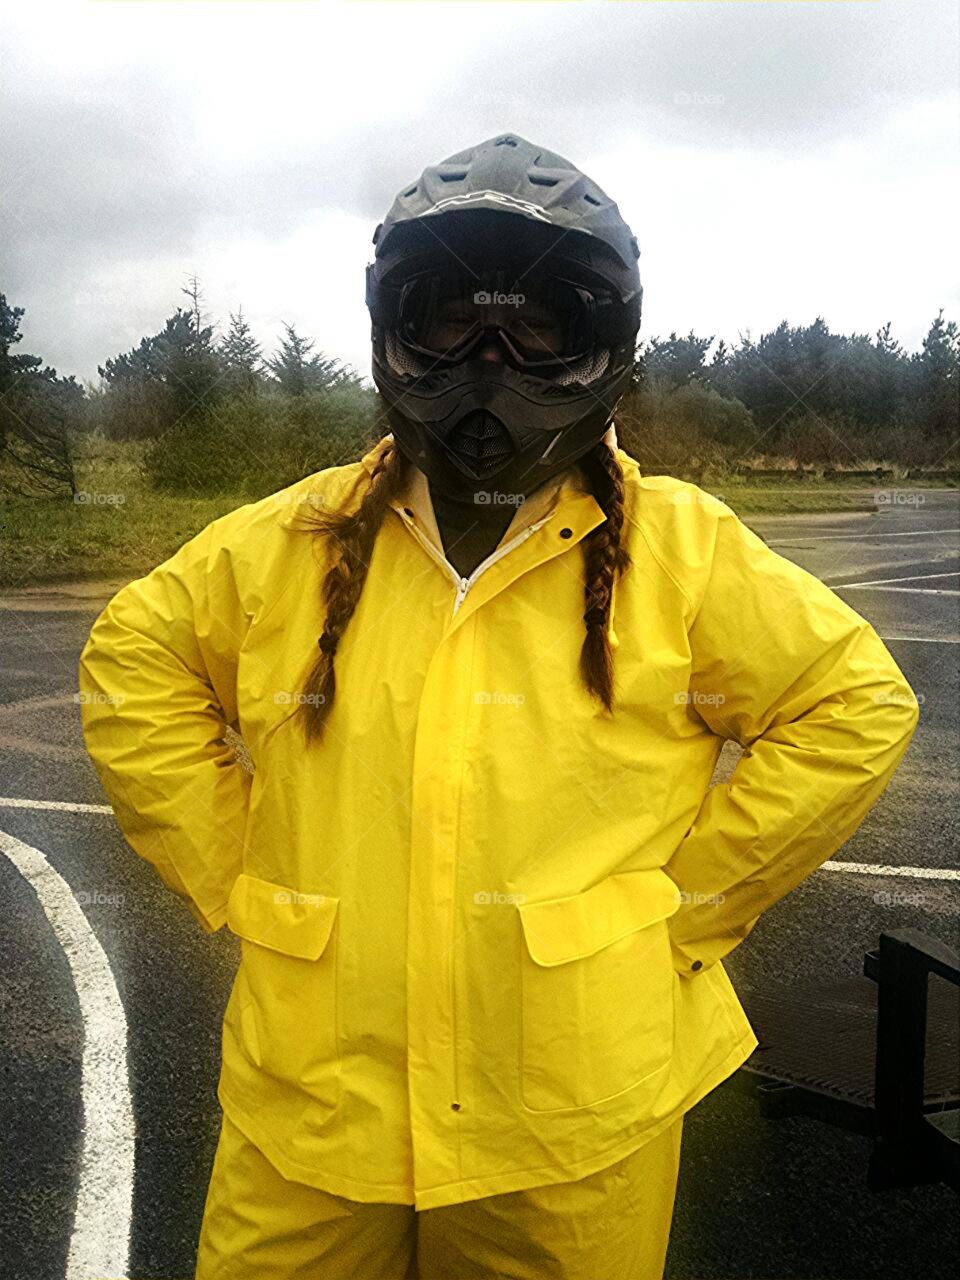 riding in wet weather